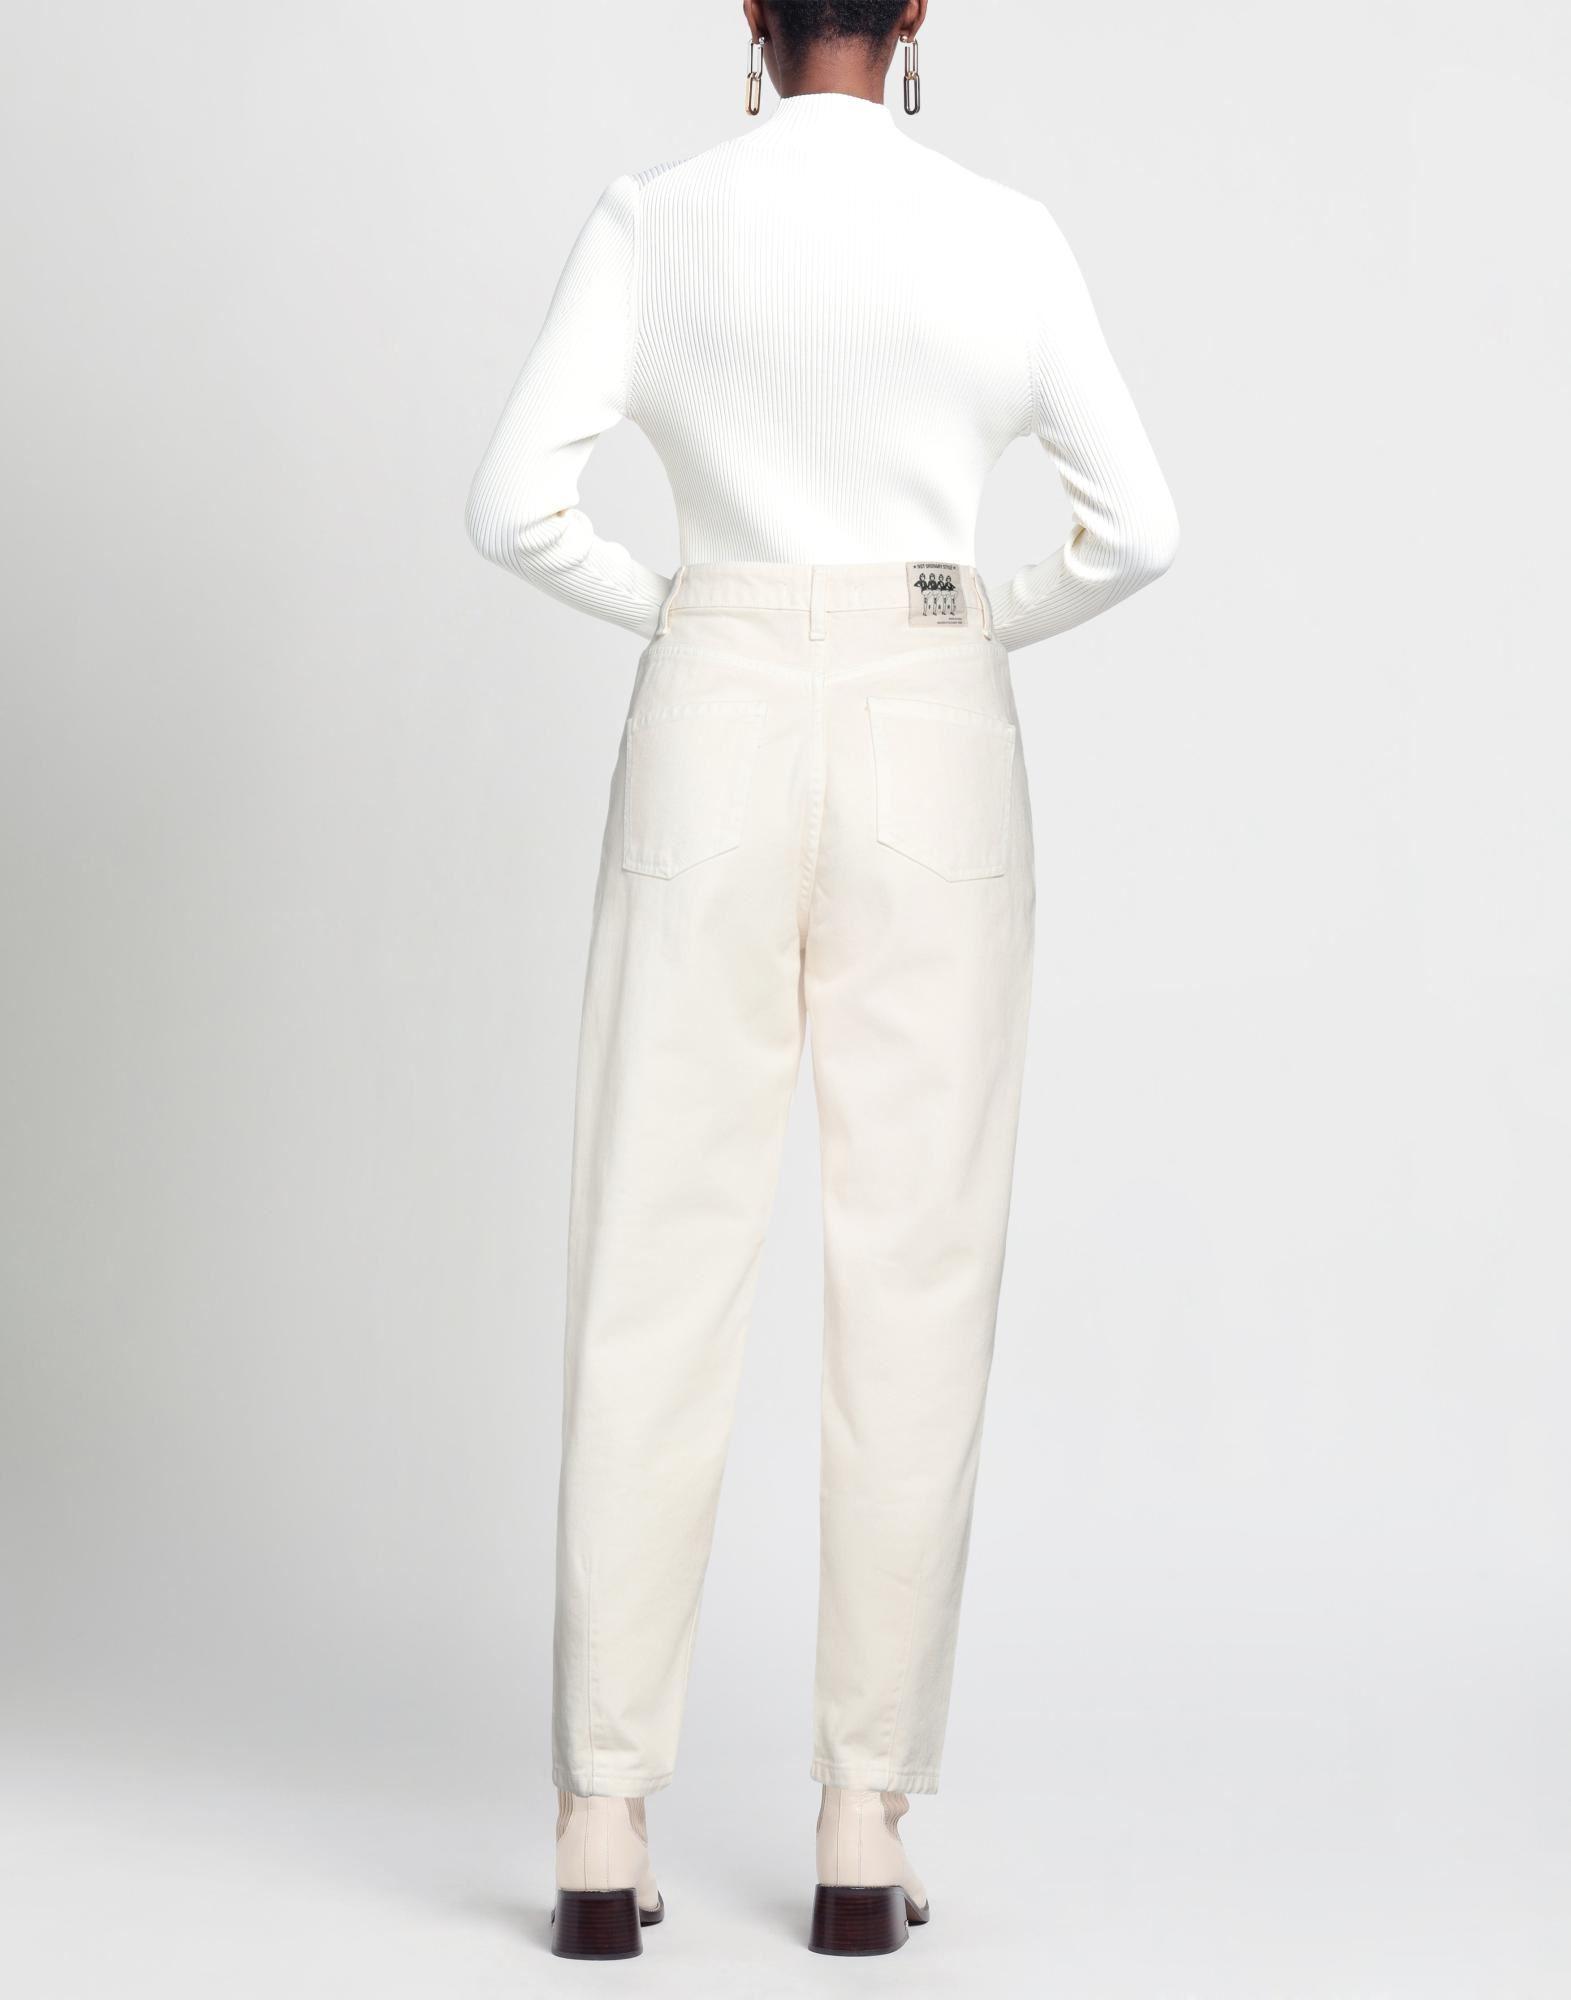 J·B4 JUST BEFORE Denim Trousers in White | Lyst